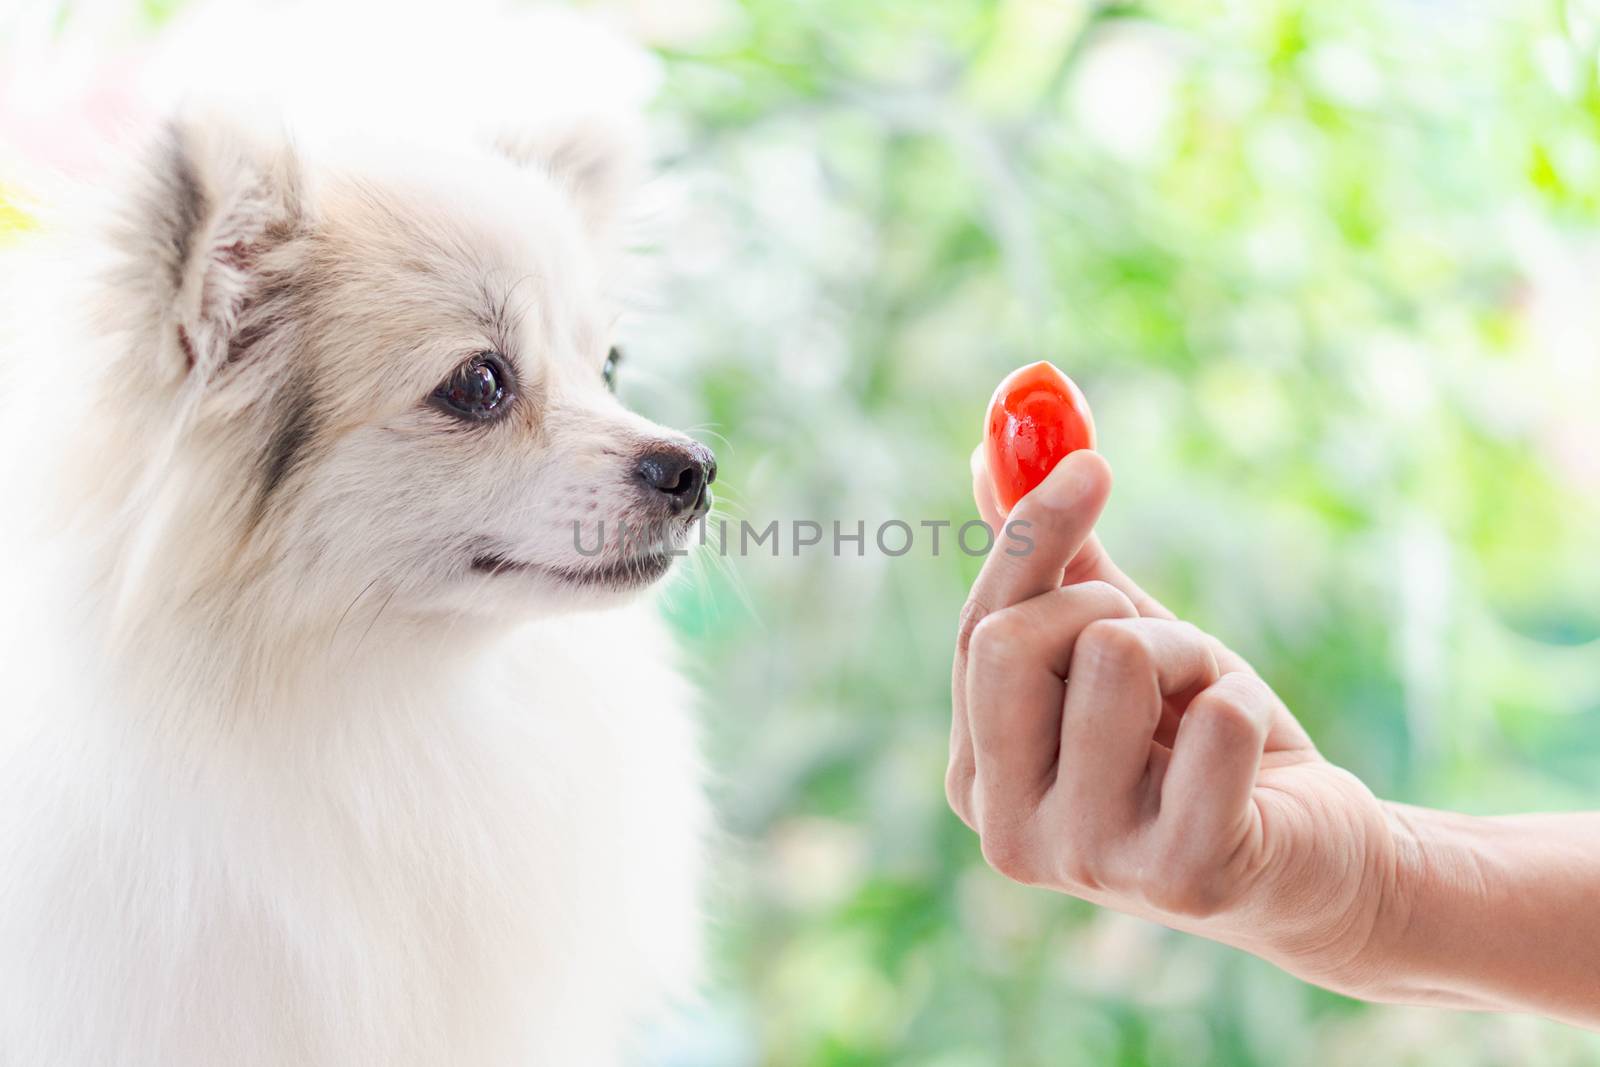 Closeup cute pomeranian dog looking red cherry tomato in hand wi by pt.pongsak@gmail.com